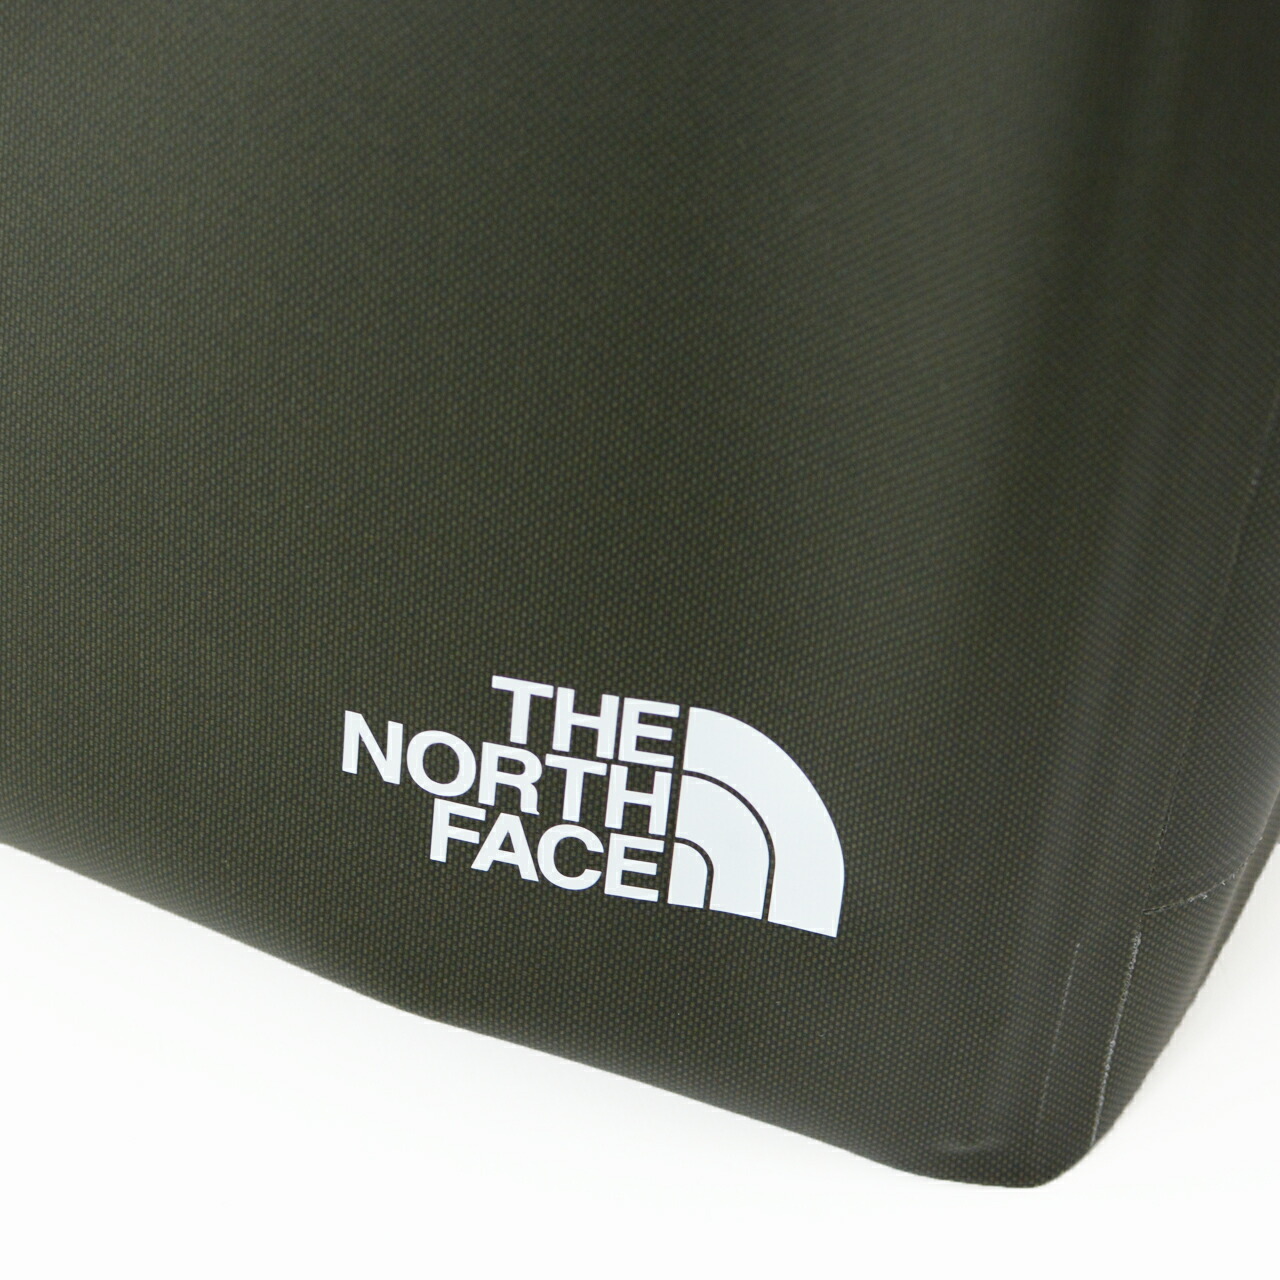 THE NORTH FACE [ザ・ノース・フェイス] Fieludens Trash Tote[NM82112]_f0051306_05425930.jpg